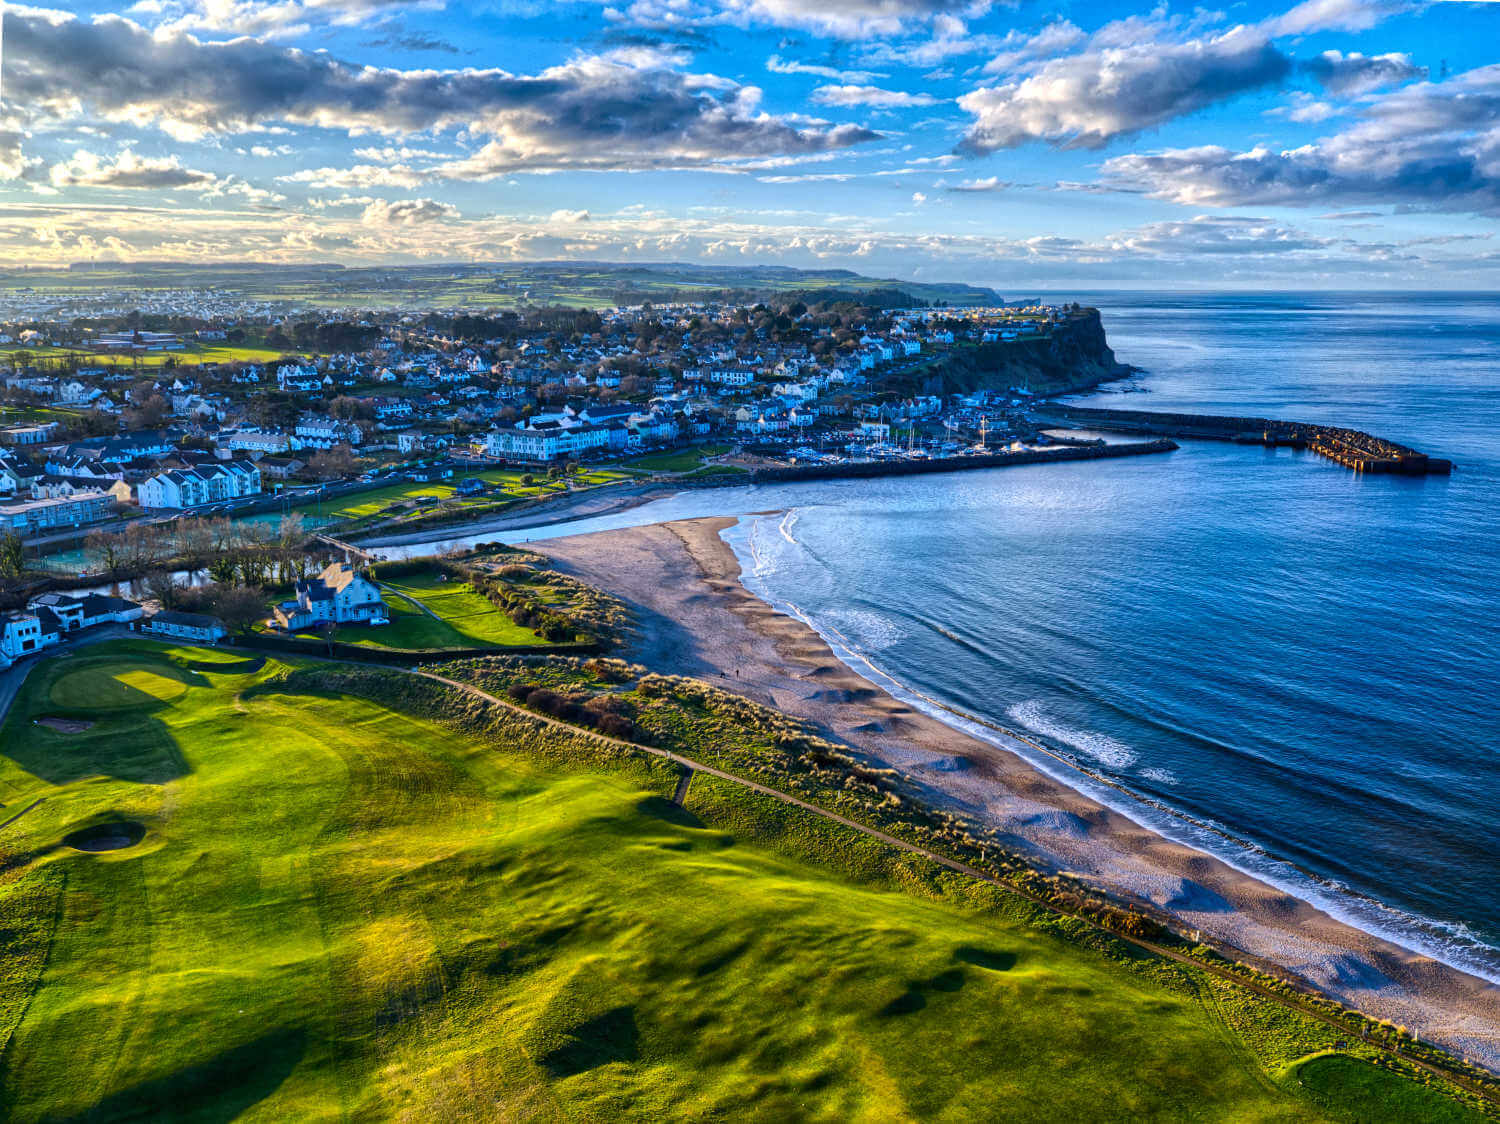 Portrush and Derry